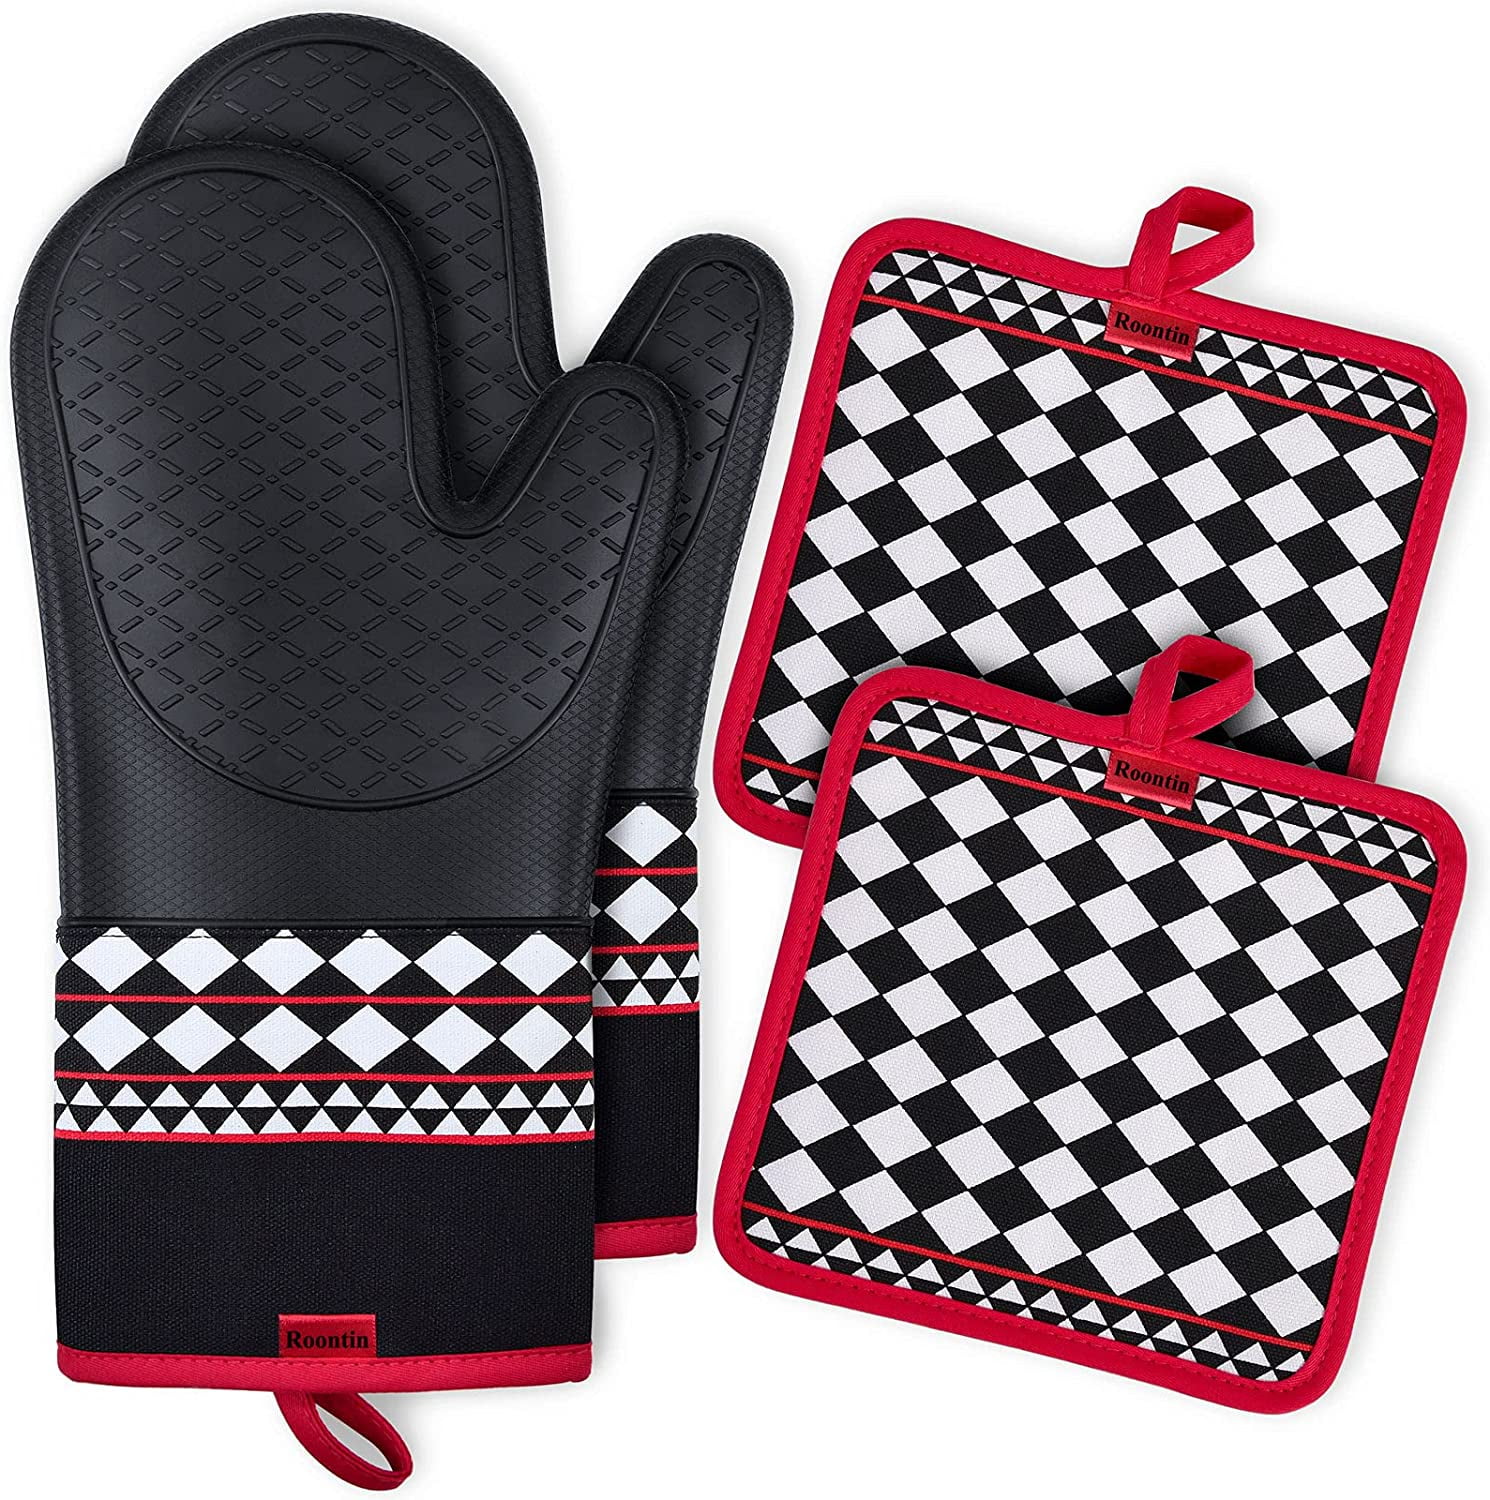 Red Rachael Ray Silicone Kitchen Oven Mitt with Quilted Cotton Liner 